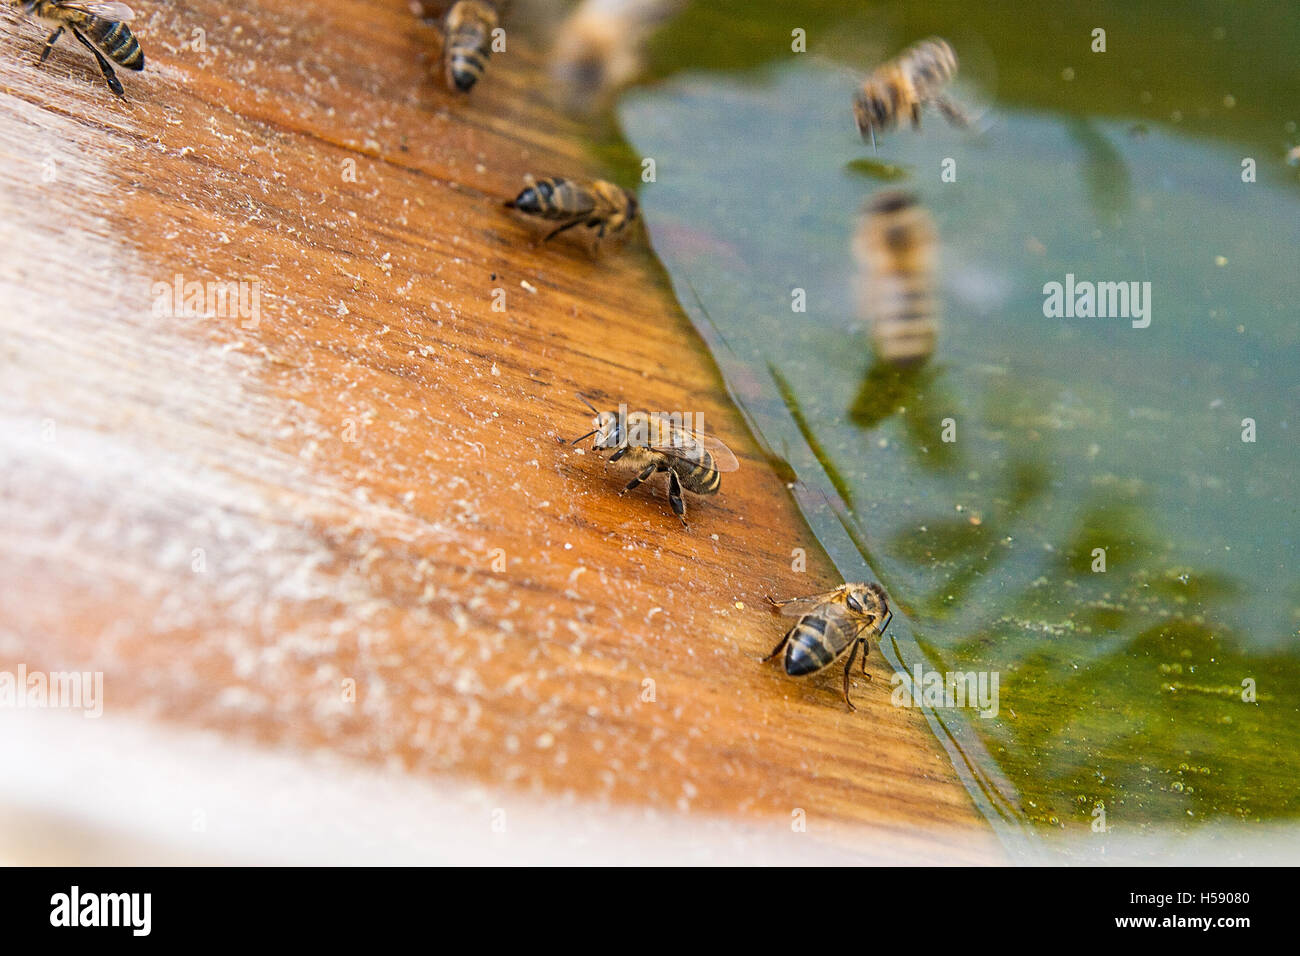 Busy bees, close up view of the working bees. Bees close up showing animals drinking water at summer time. Stock Photo